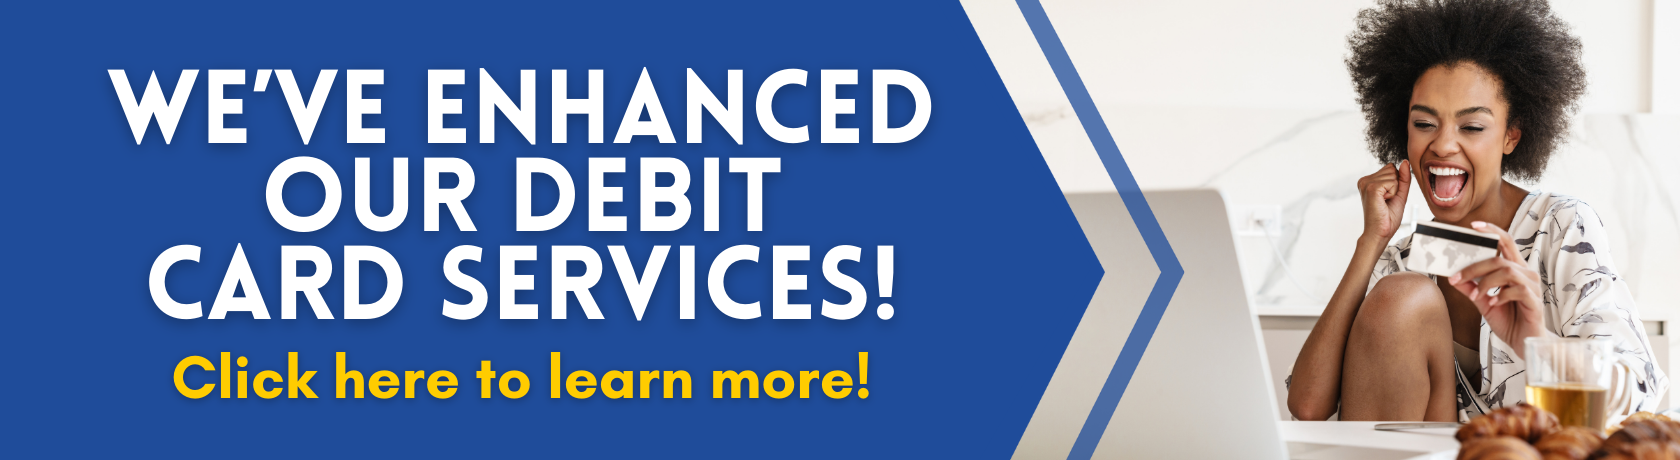 We've enhanced your debit card services
Learn more here
New as of 08/23/2023 Text Alerts